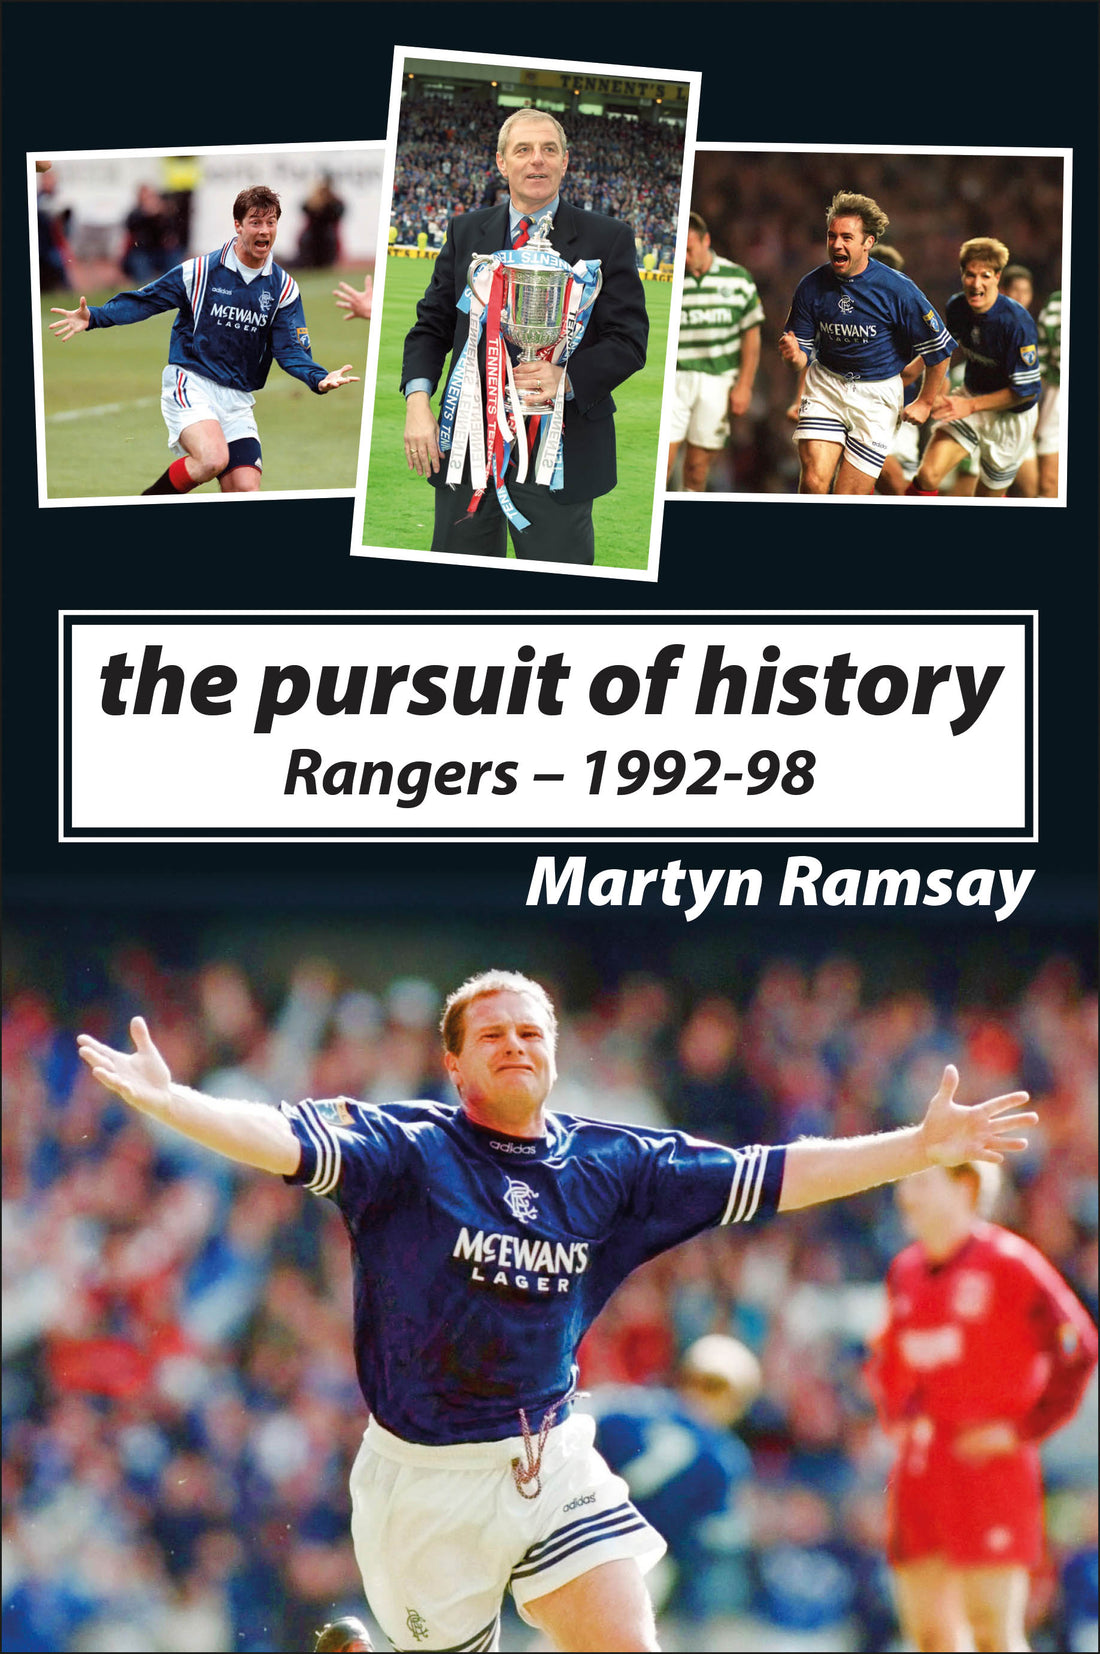 The Rangers Review - Martyn's on YouTube discussing his book